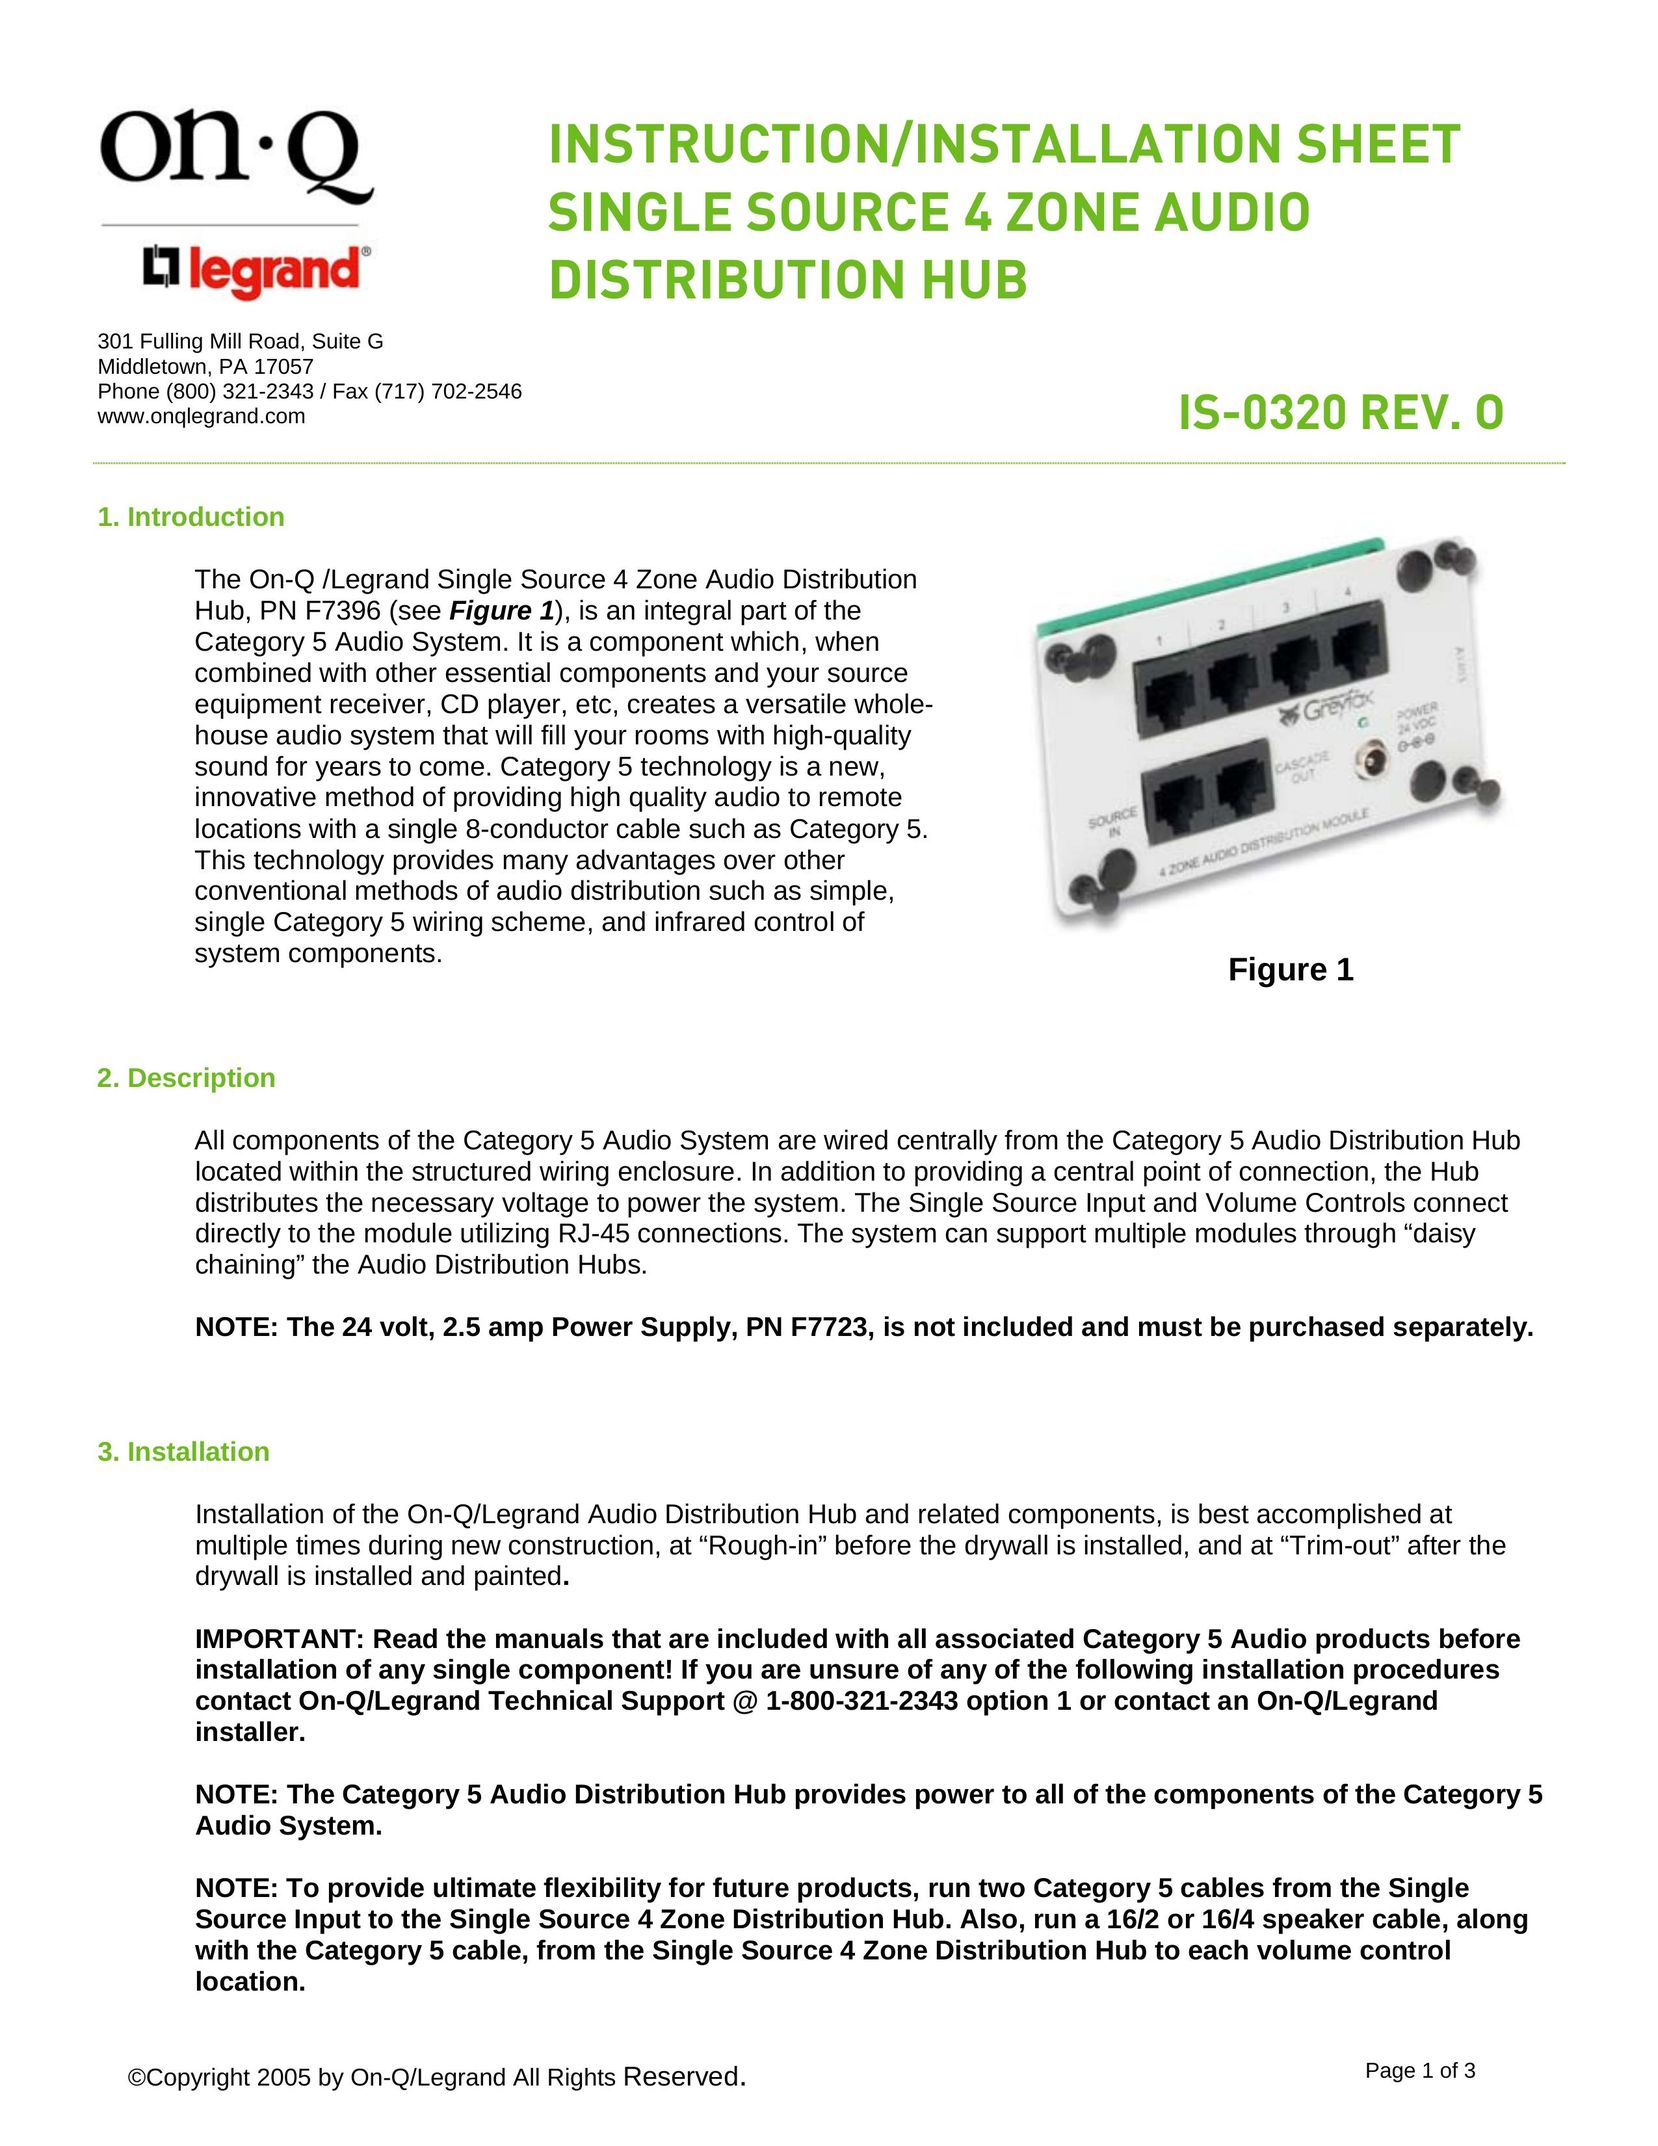 On-Q/Legrand IS-0320 REV. O Switch User Manual